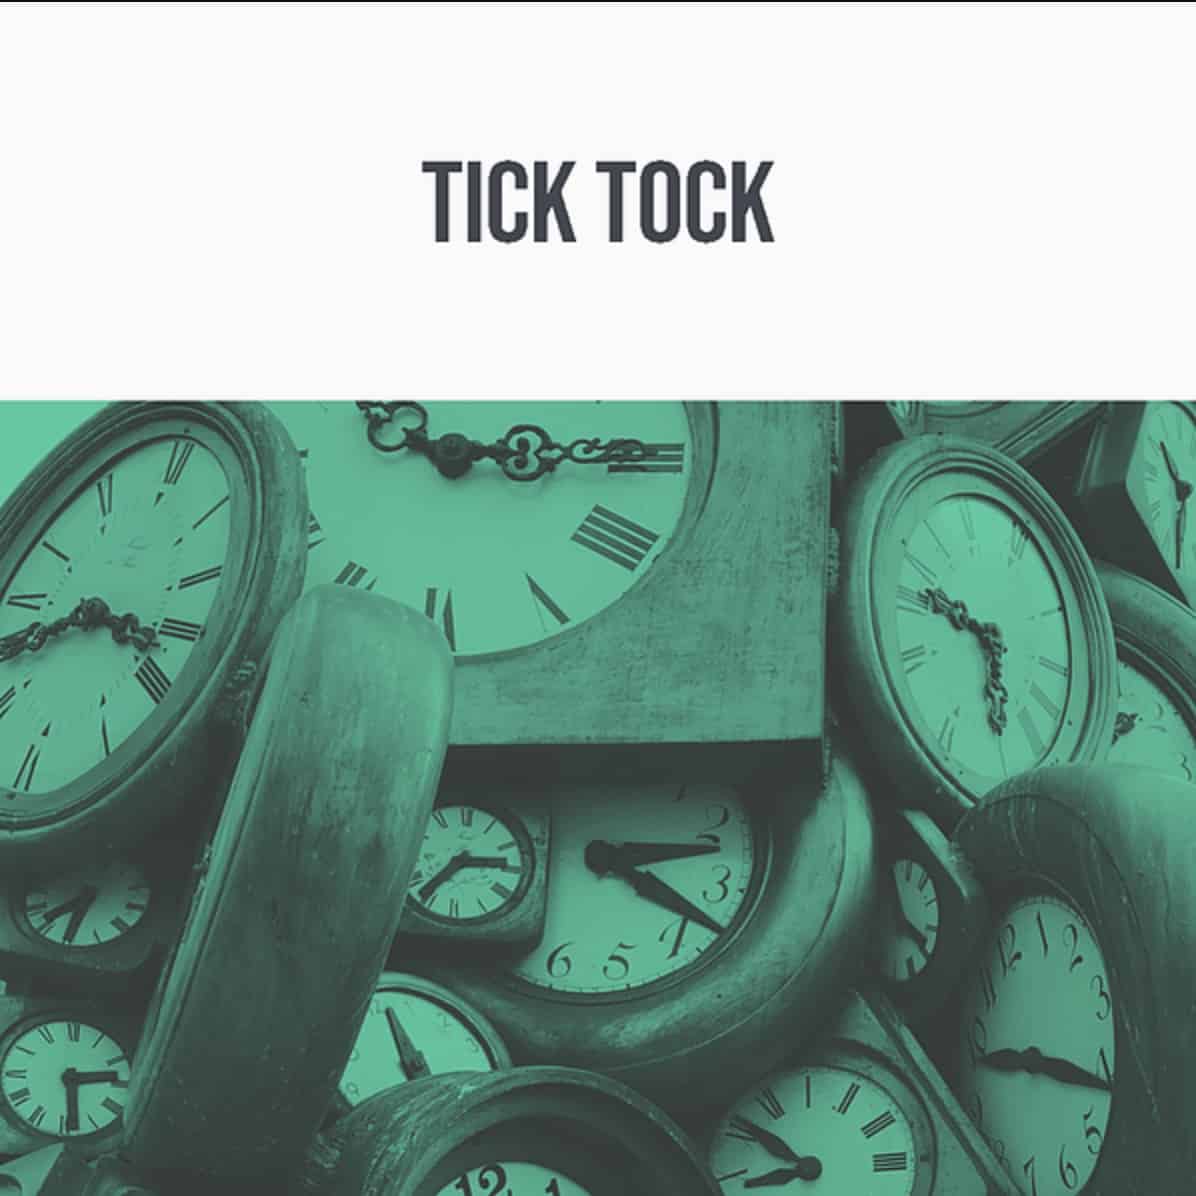 TICK TOCK a New Sound Effects Library